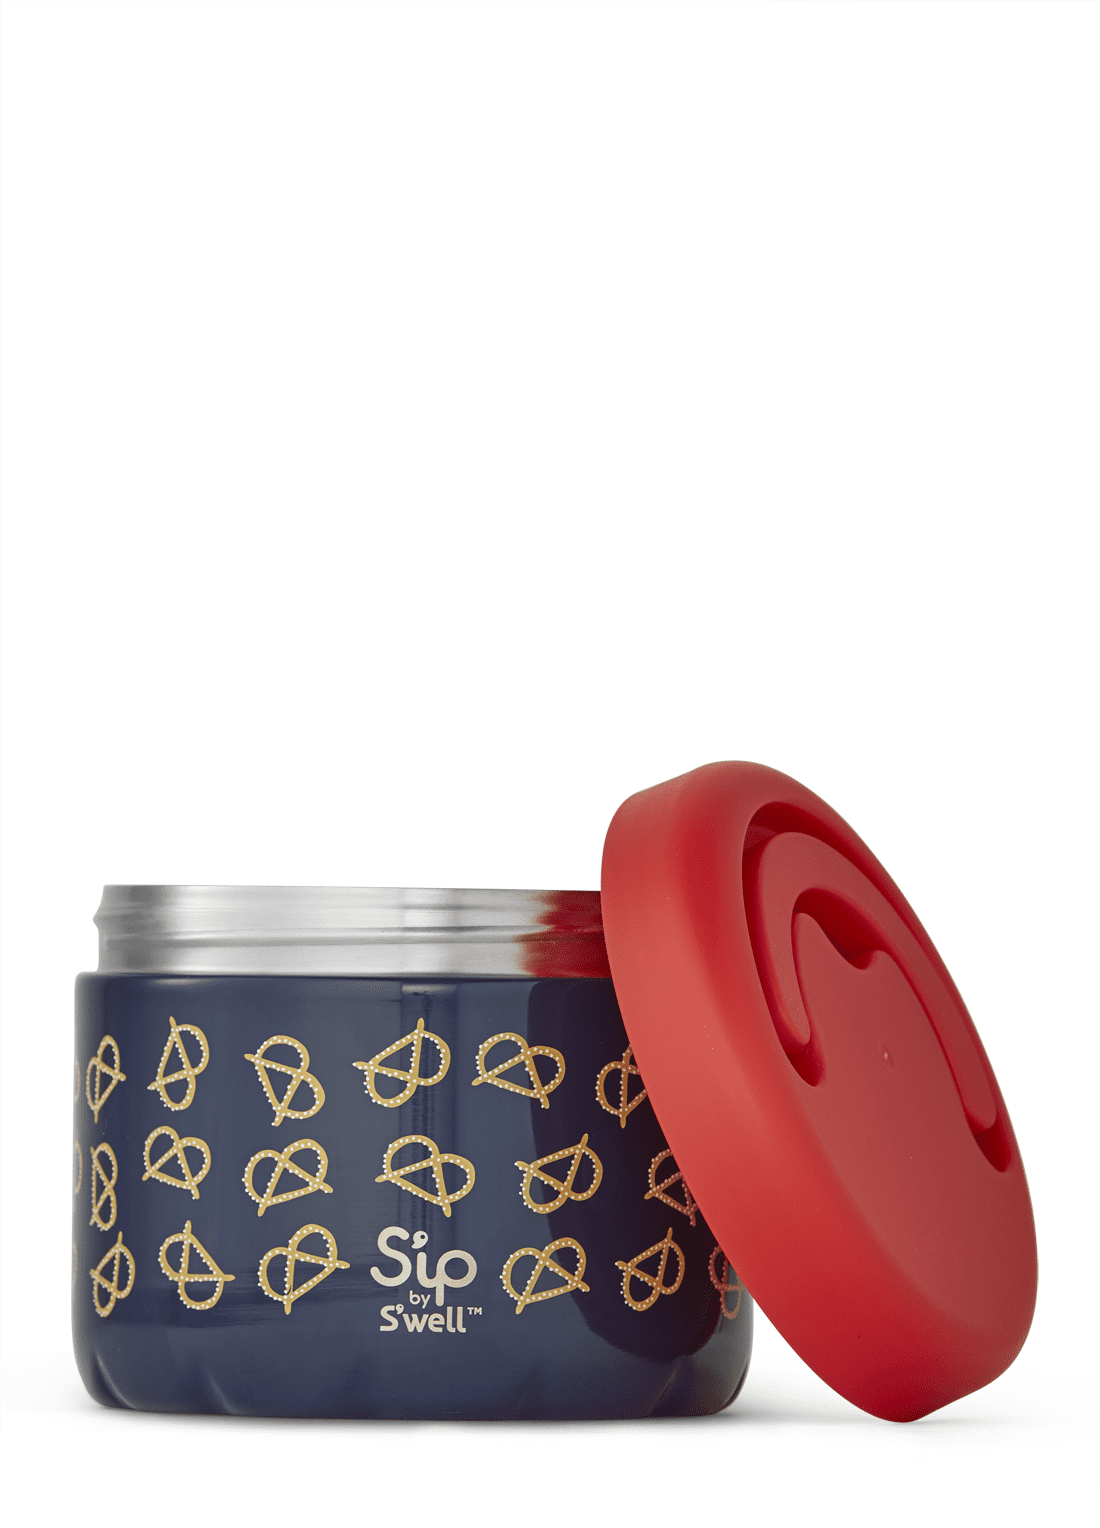 S'nack by S'well 24-oz. Pretzels Container